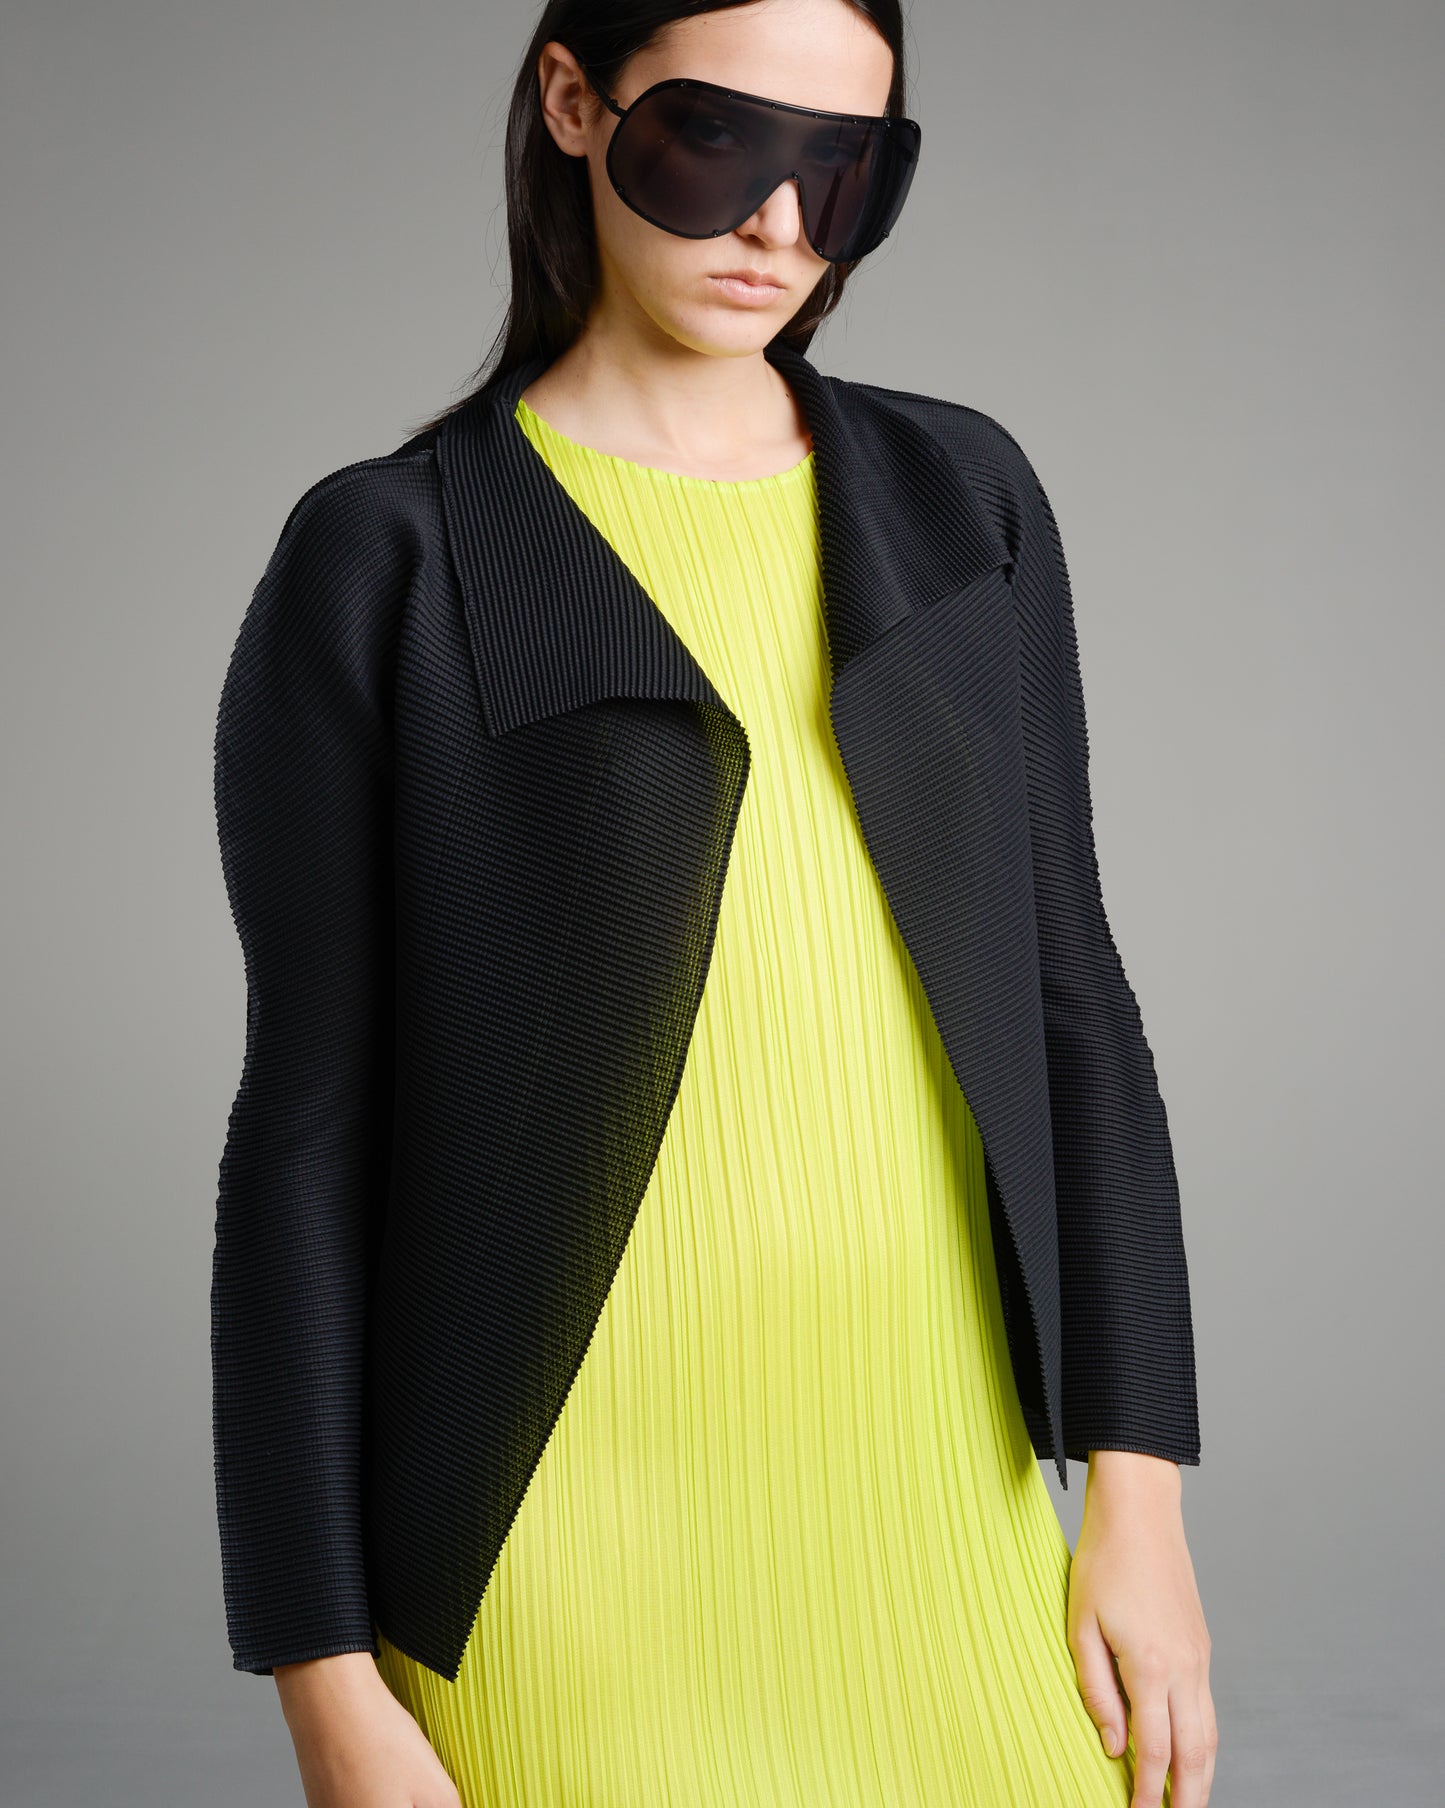 Black Micropleated Square Cardigan